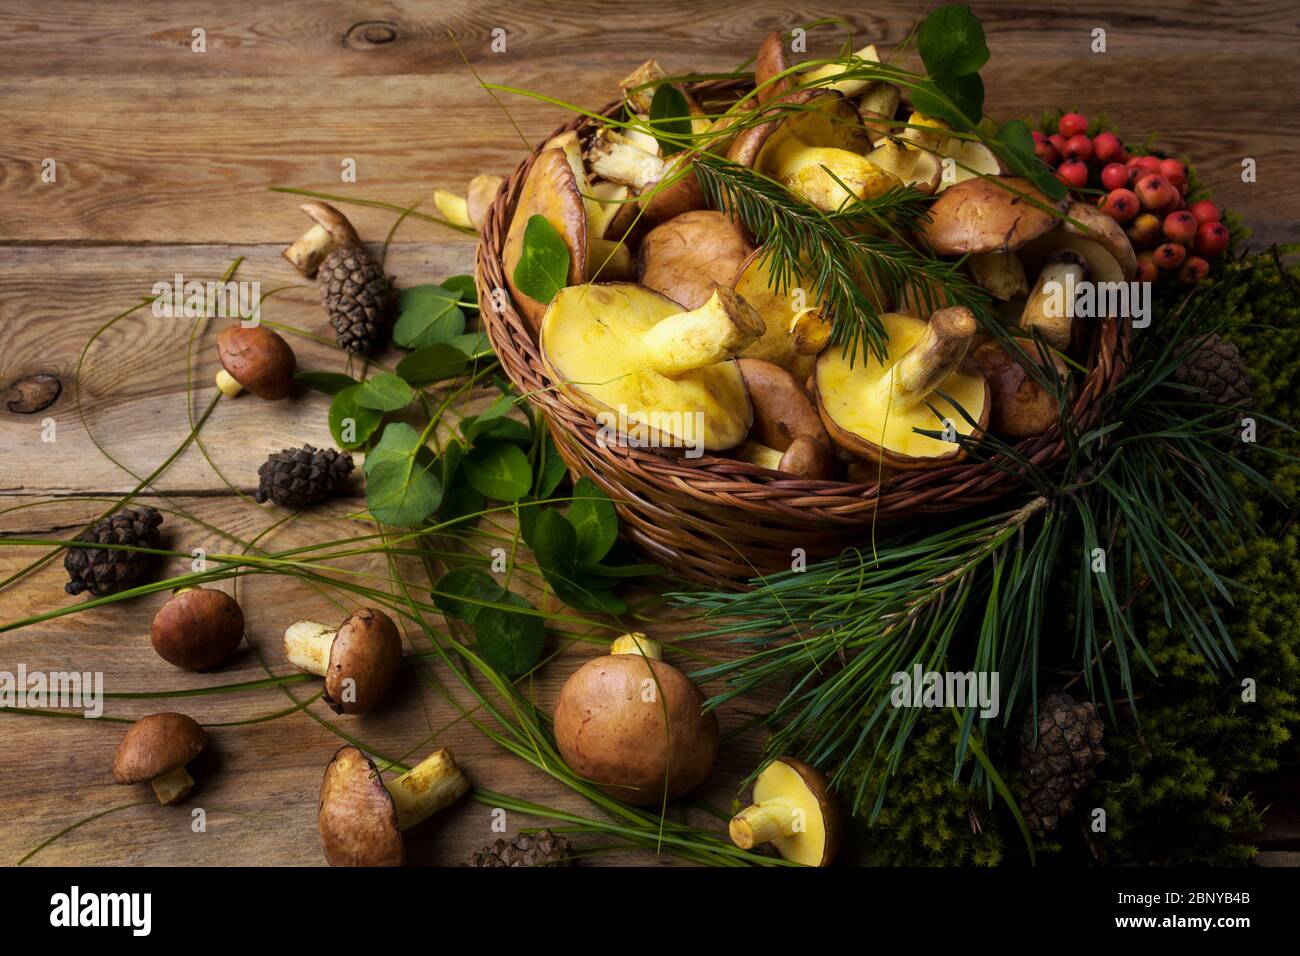 Wicker basket with wild forest picking slippery Jack mushrooms, green leaves, berries on the rustic wooden background, close up. Vegetarian healthy fo Stock Photo